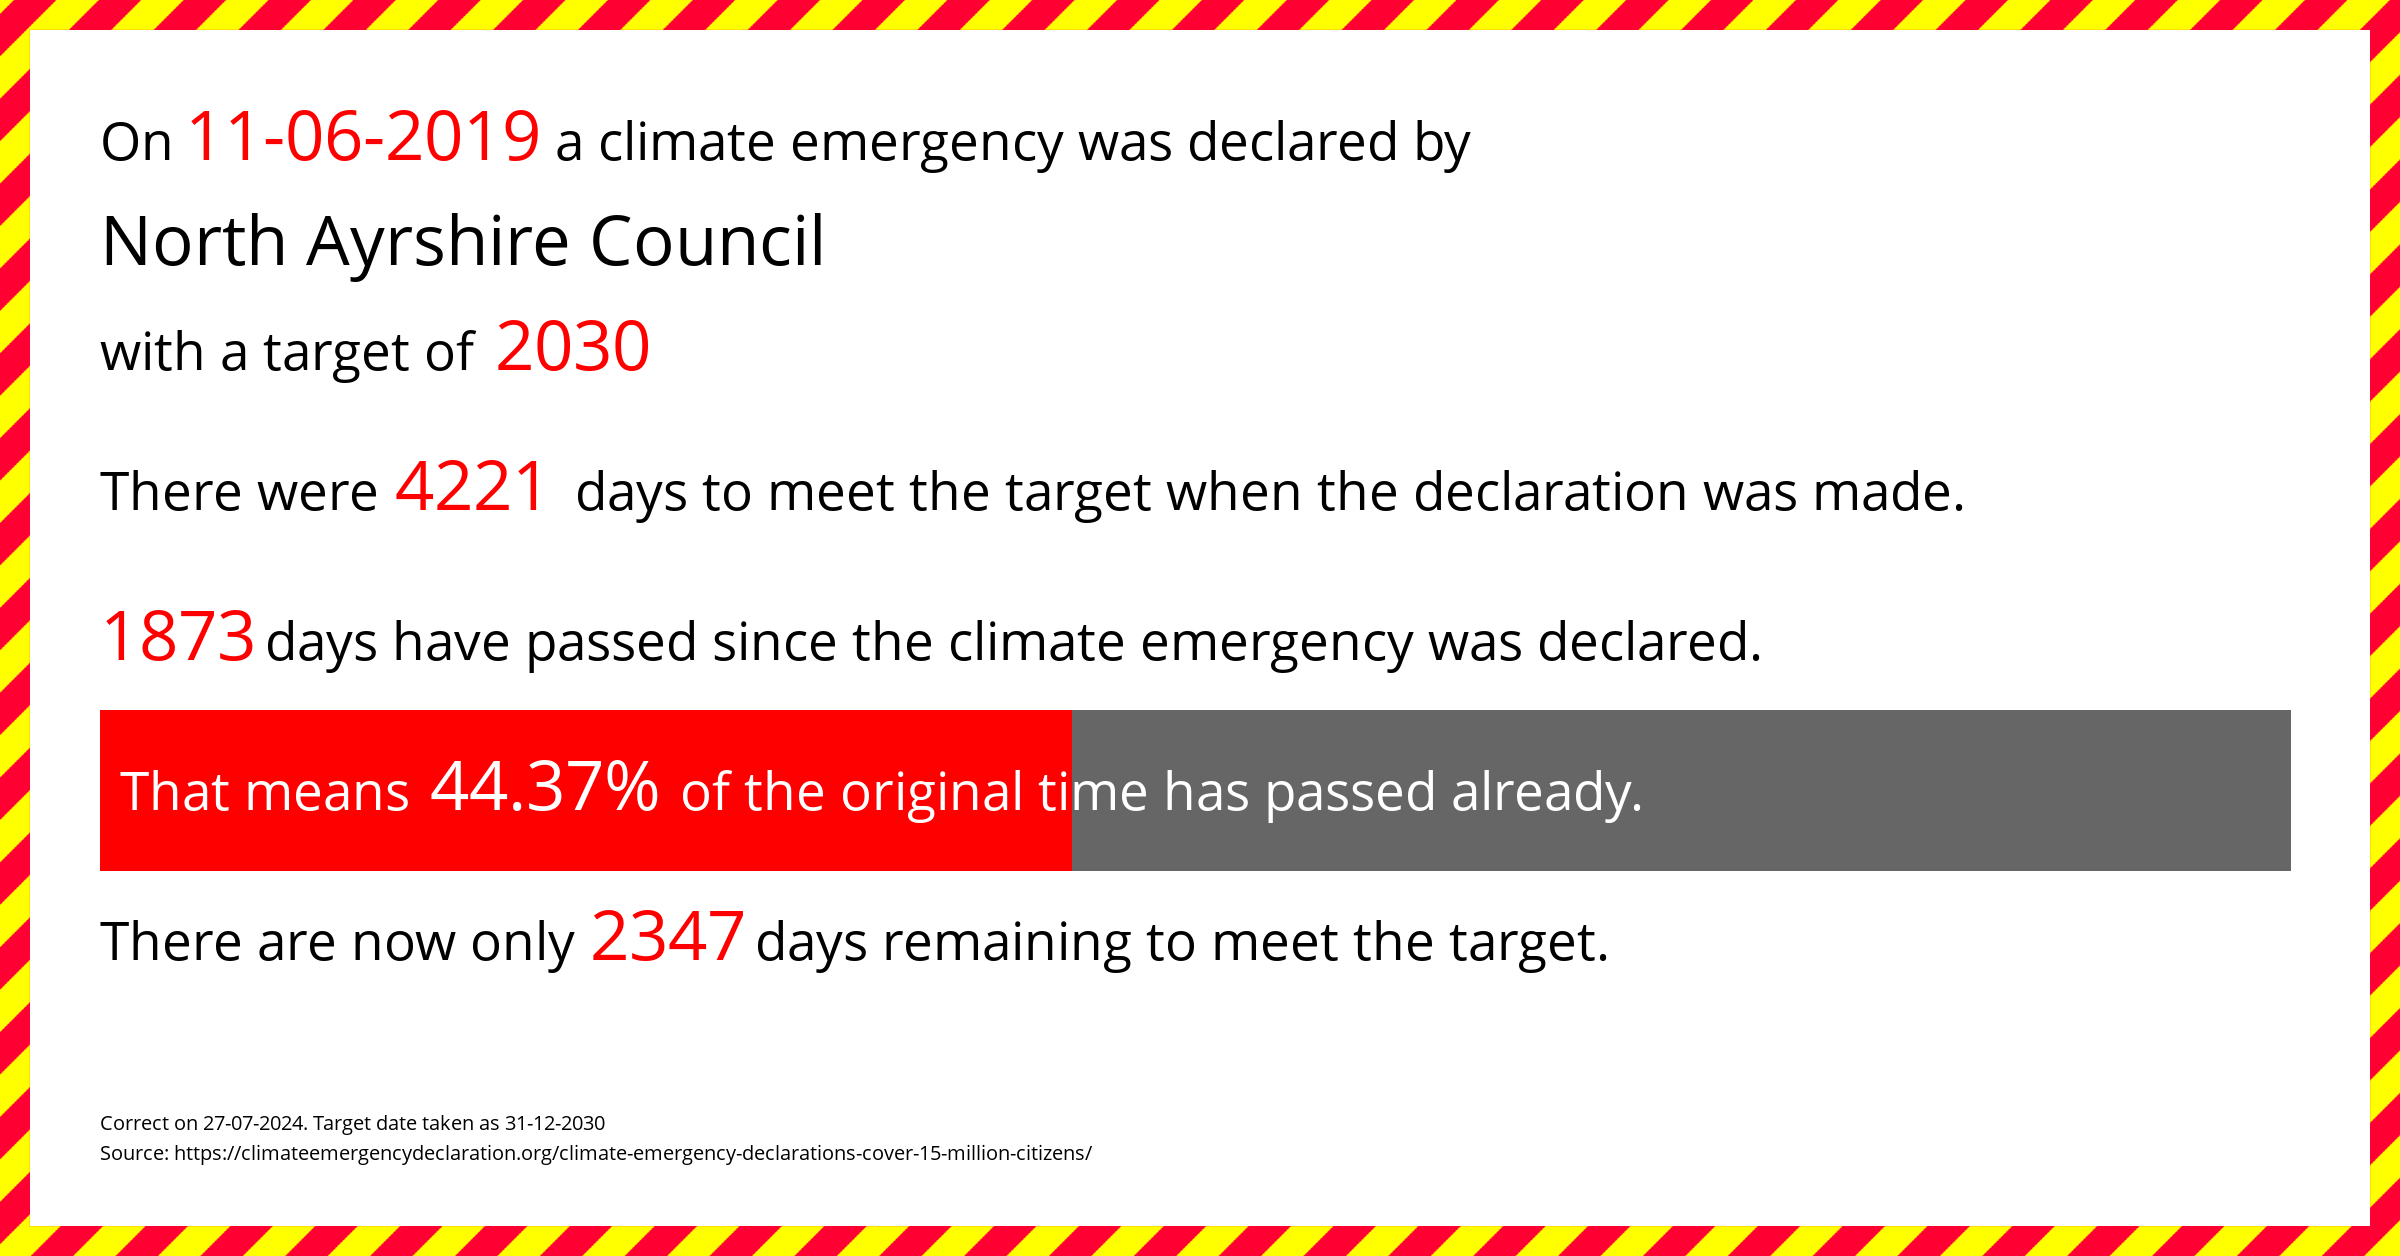 North Ayrshire Council  declared a Climate emergency on Tuesday 11th June 2019, with a target of 2030.